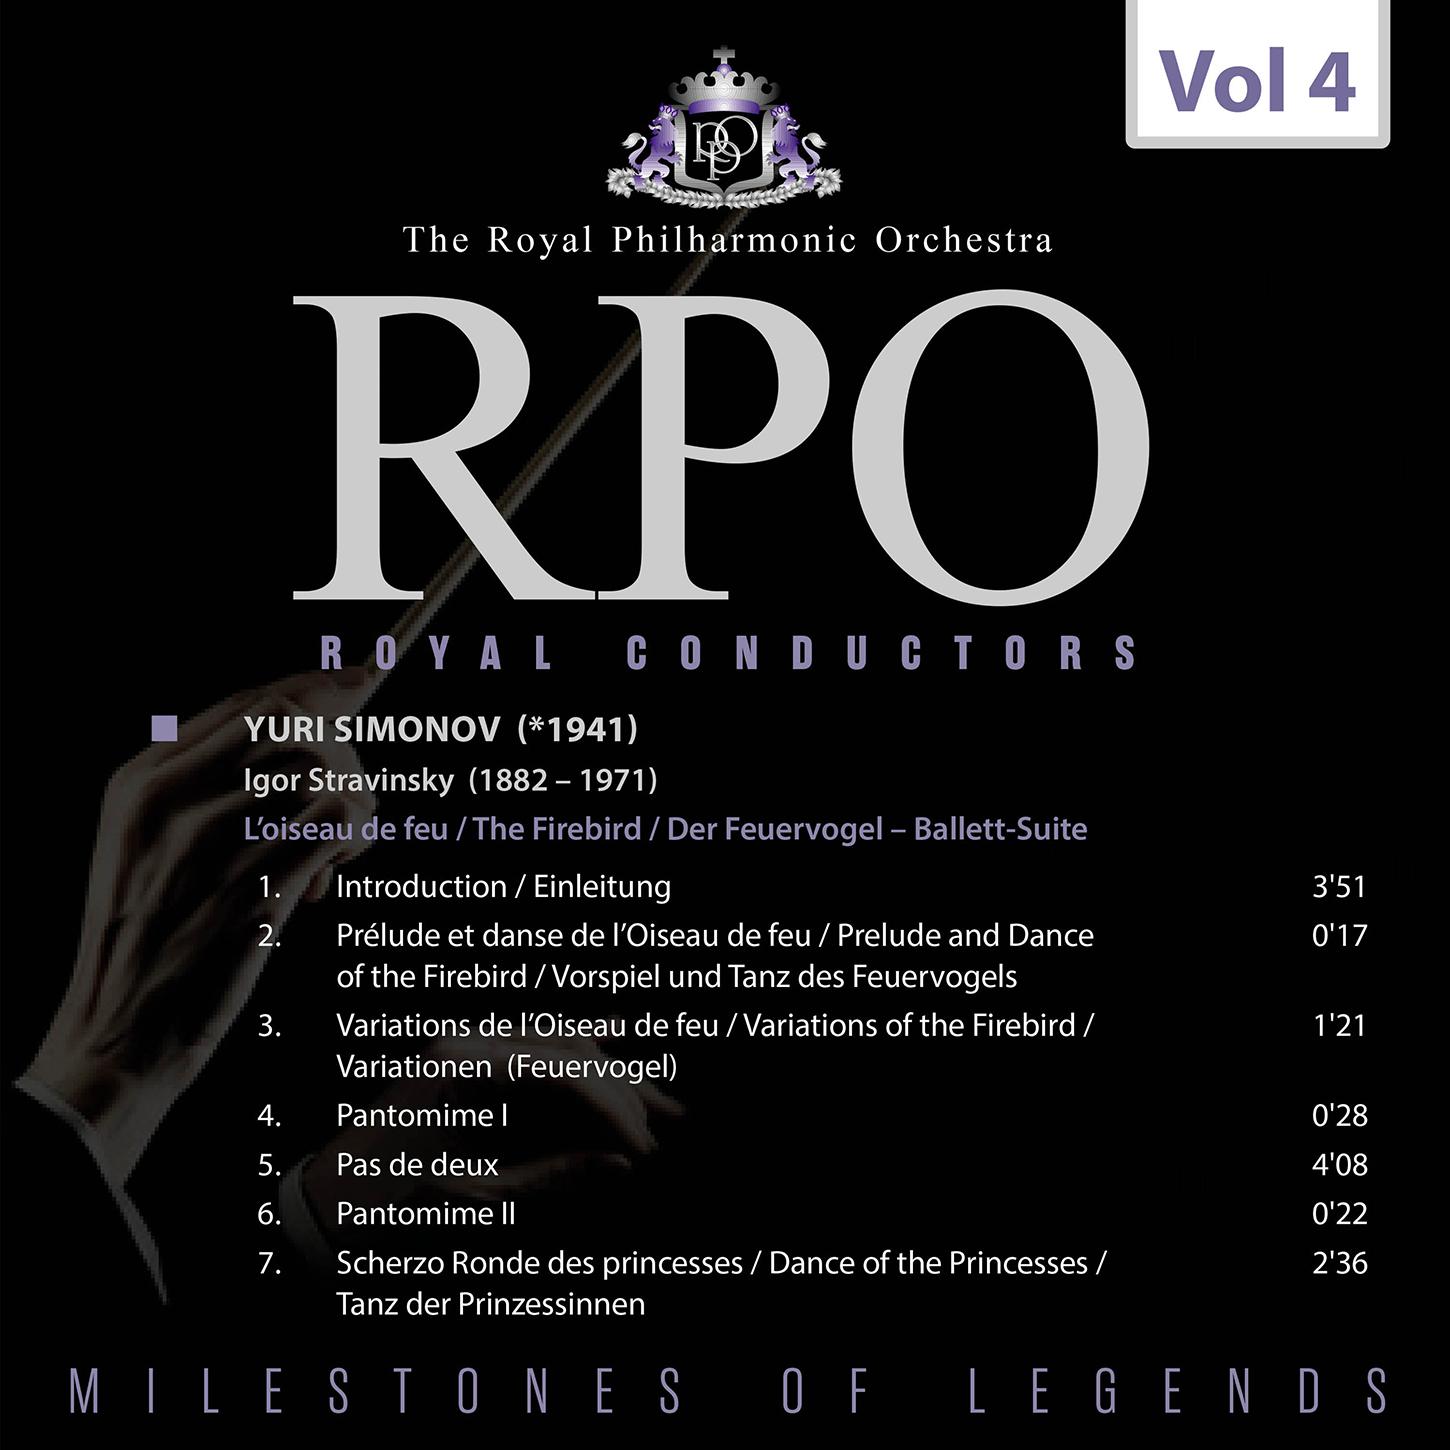 Royal Philharmonic Orchestra - Symphony No. 1 in D Major, Op. 25 